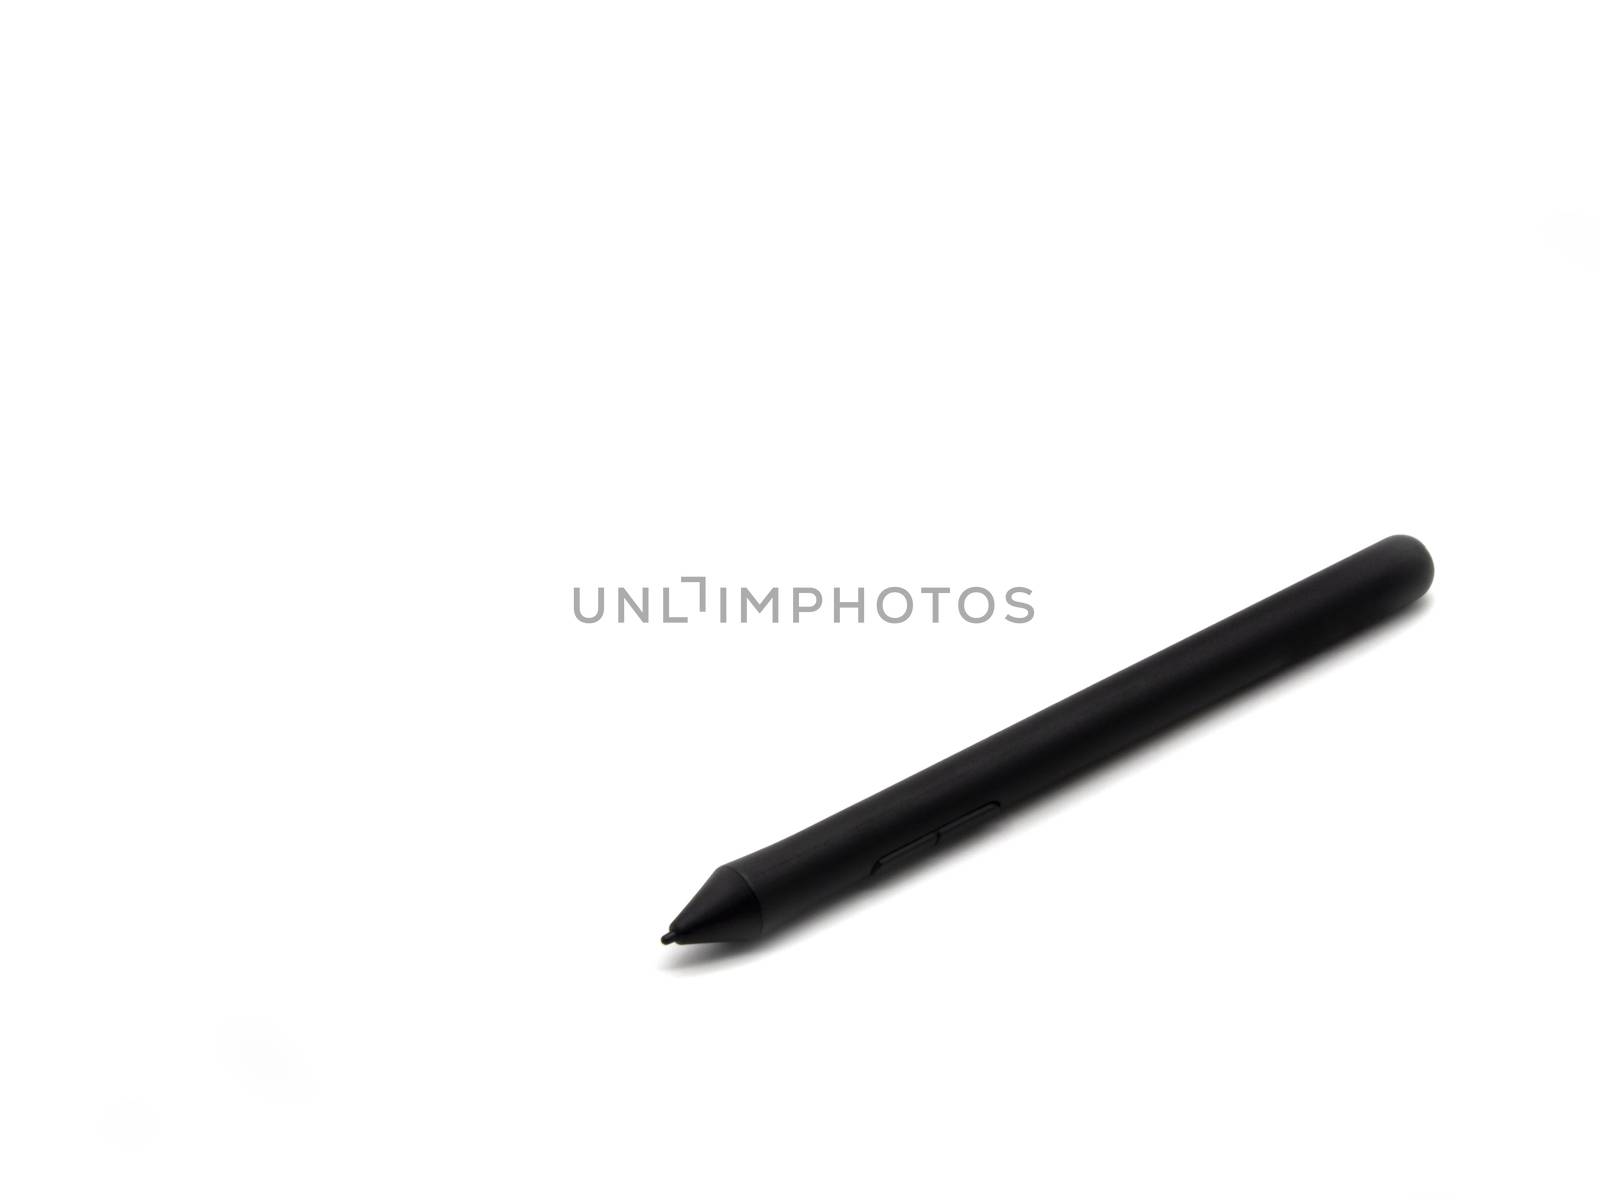 A black pen mouse, digital pen isolated on a white background with copy space.